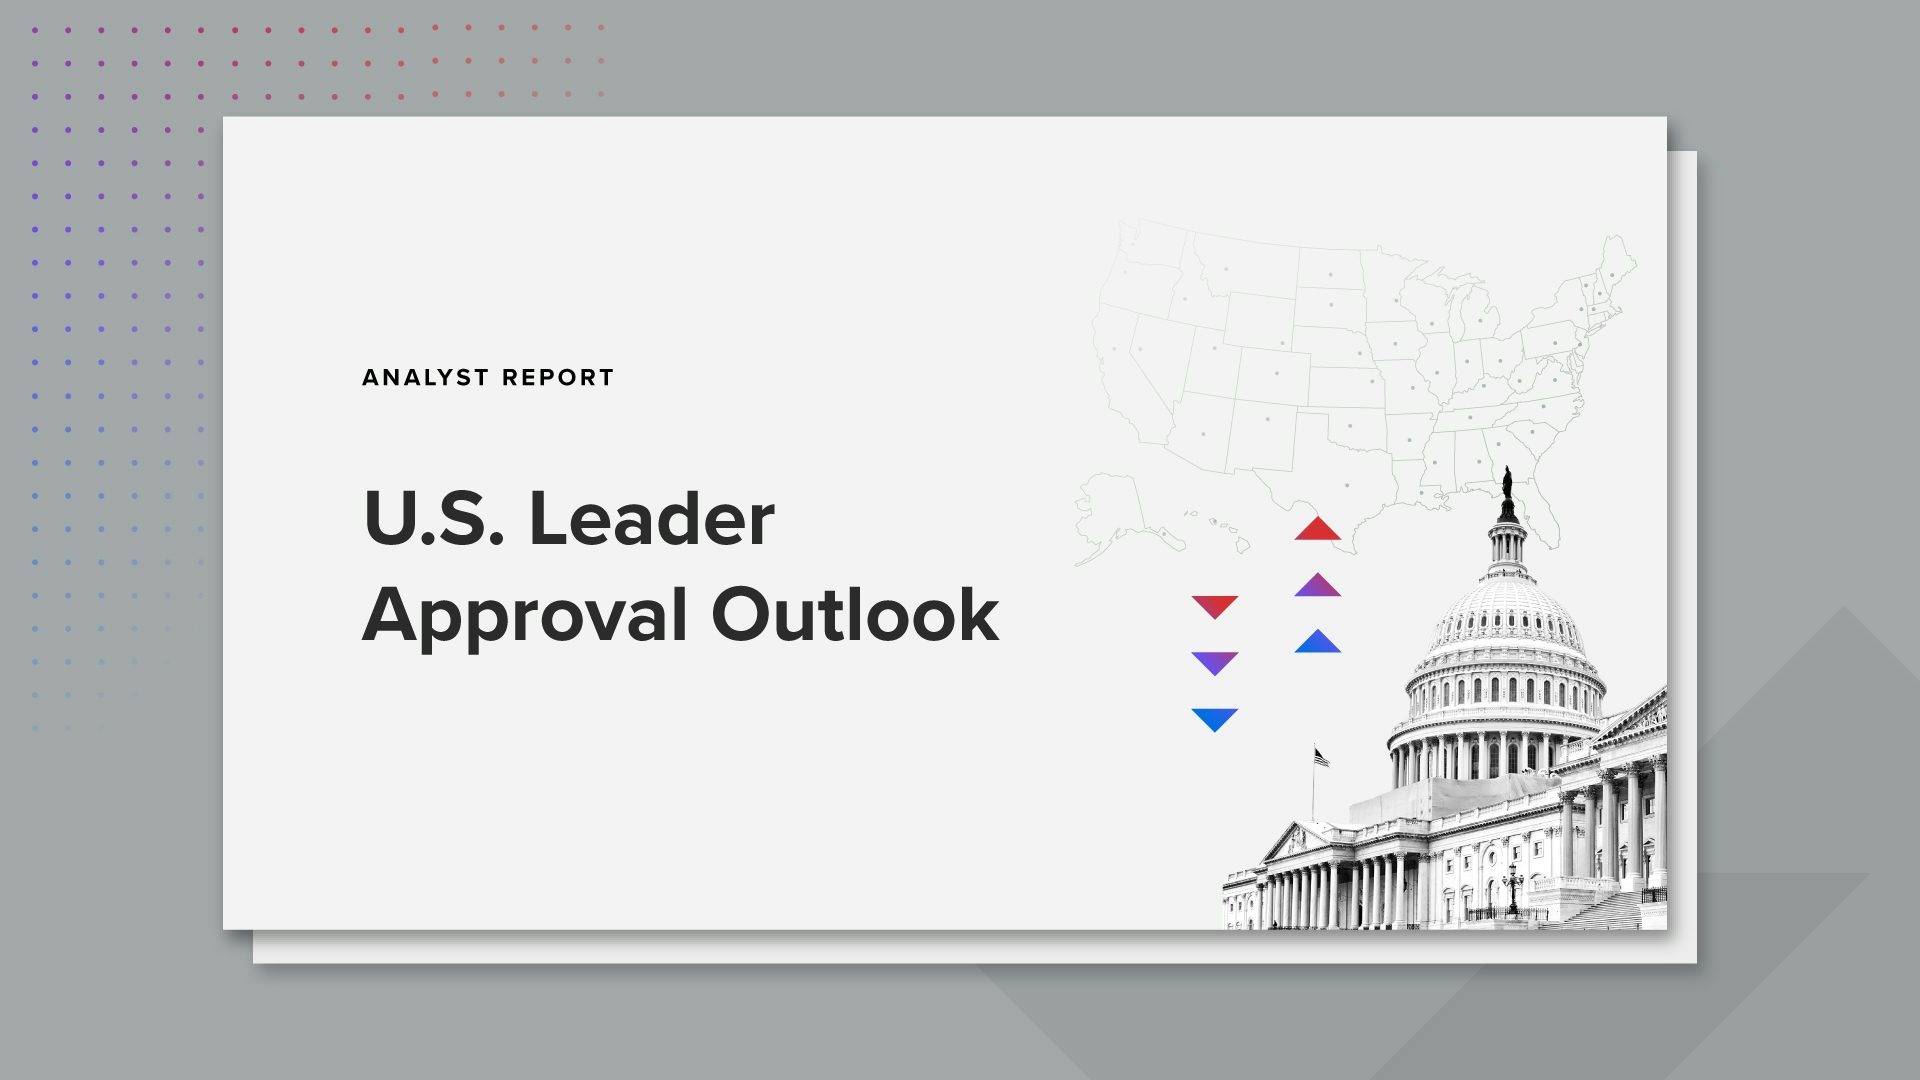 Download the U.S. Leader Approval Outlook